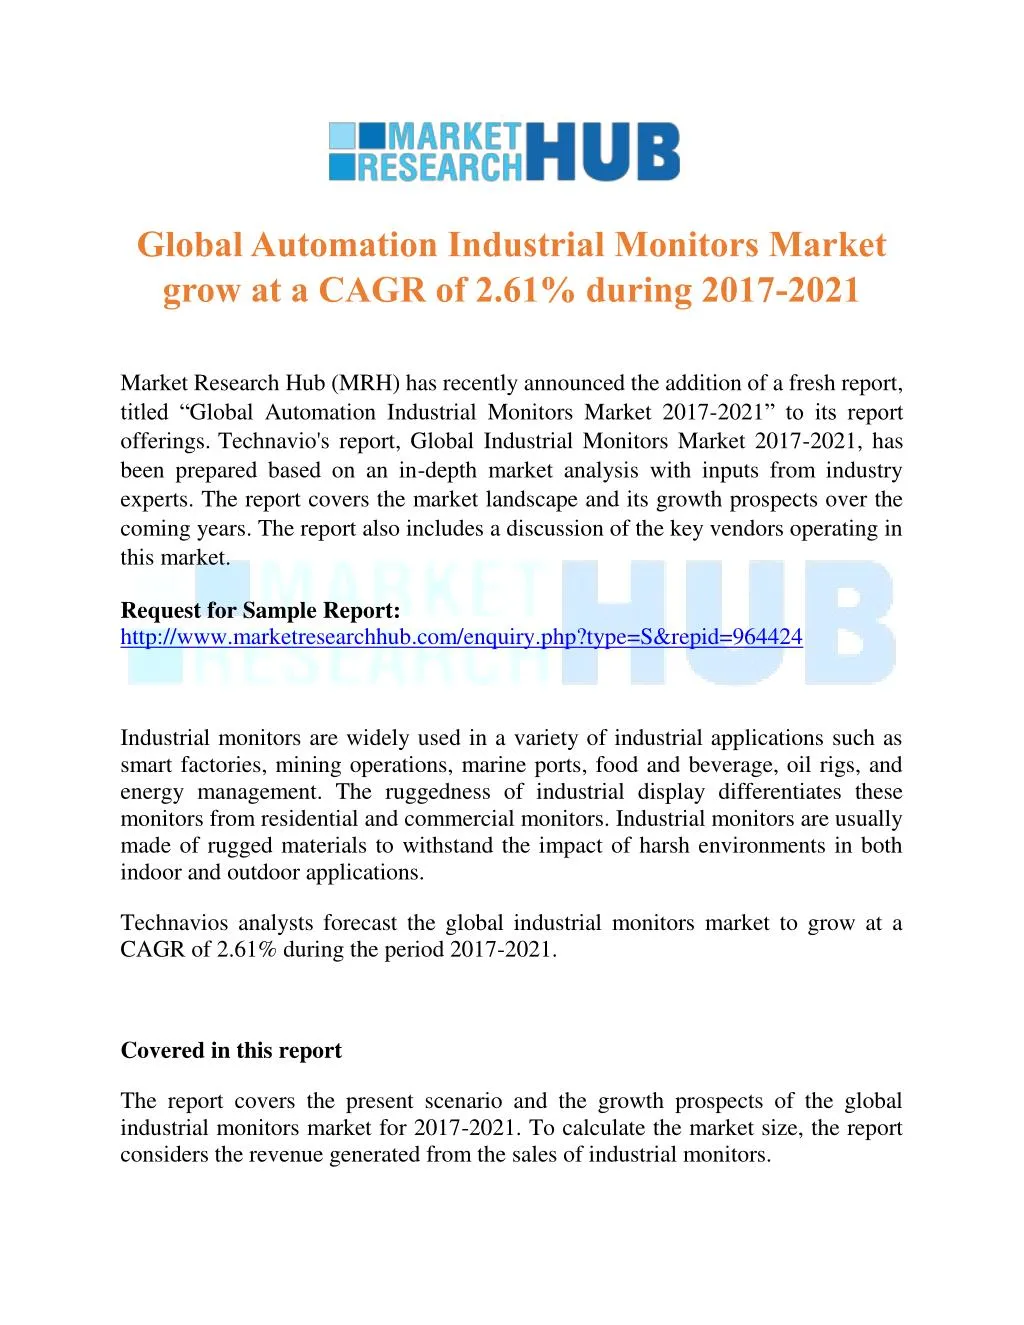 global automation industrial monitors market grow n.